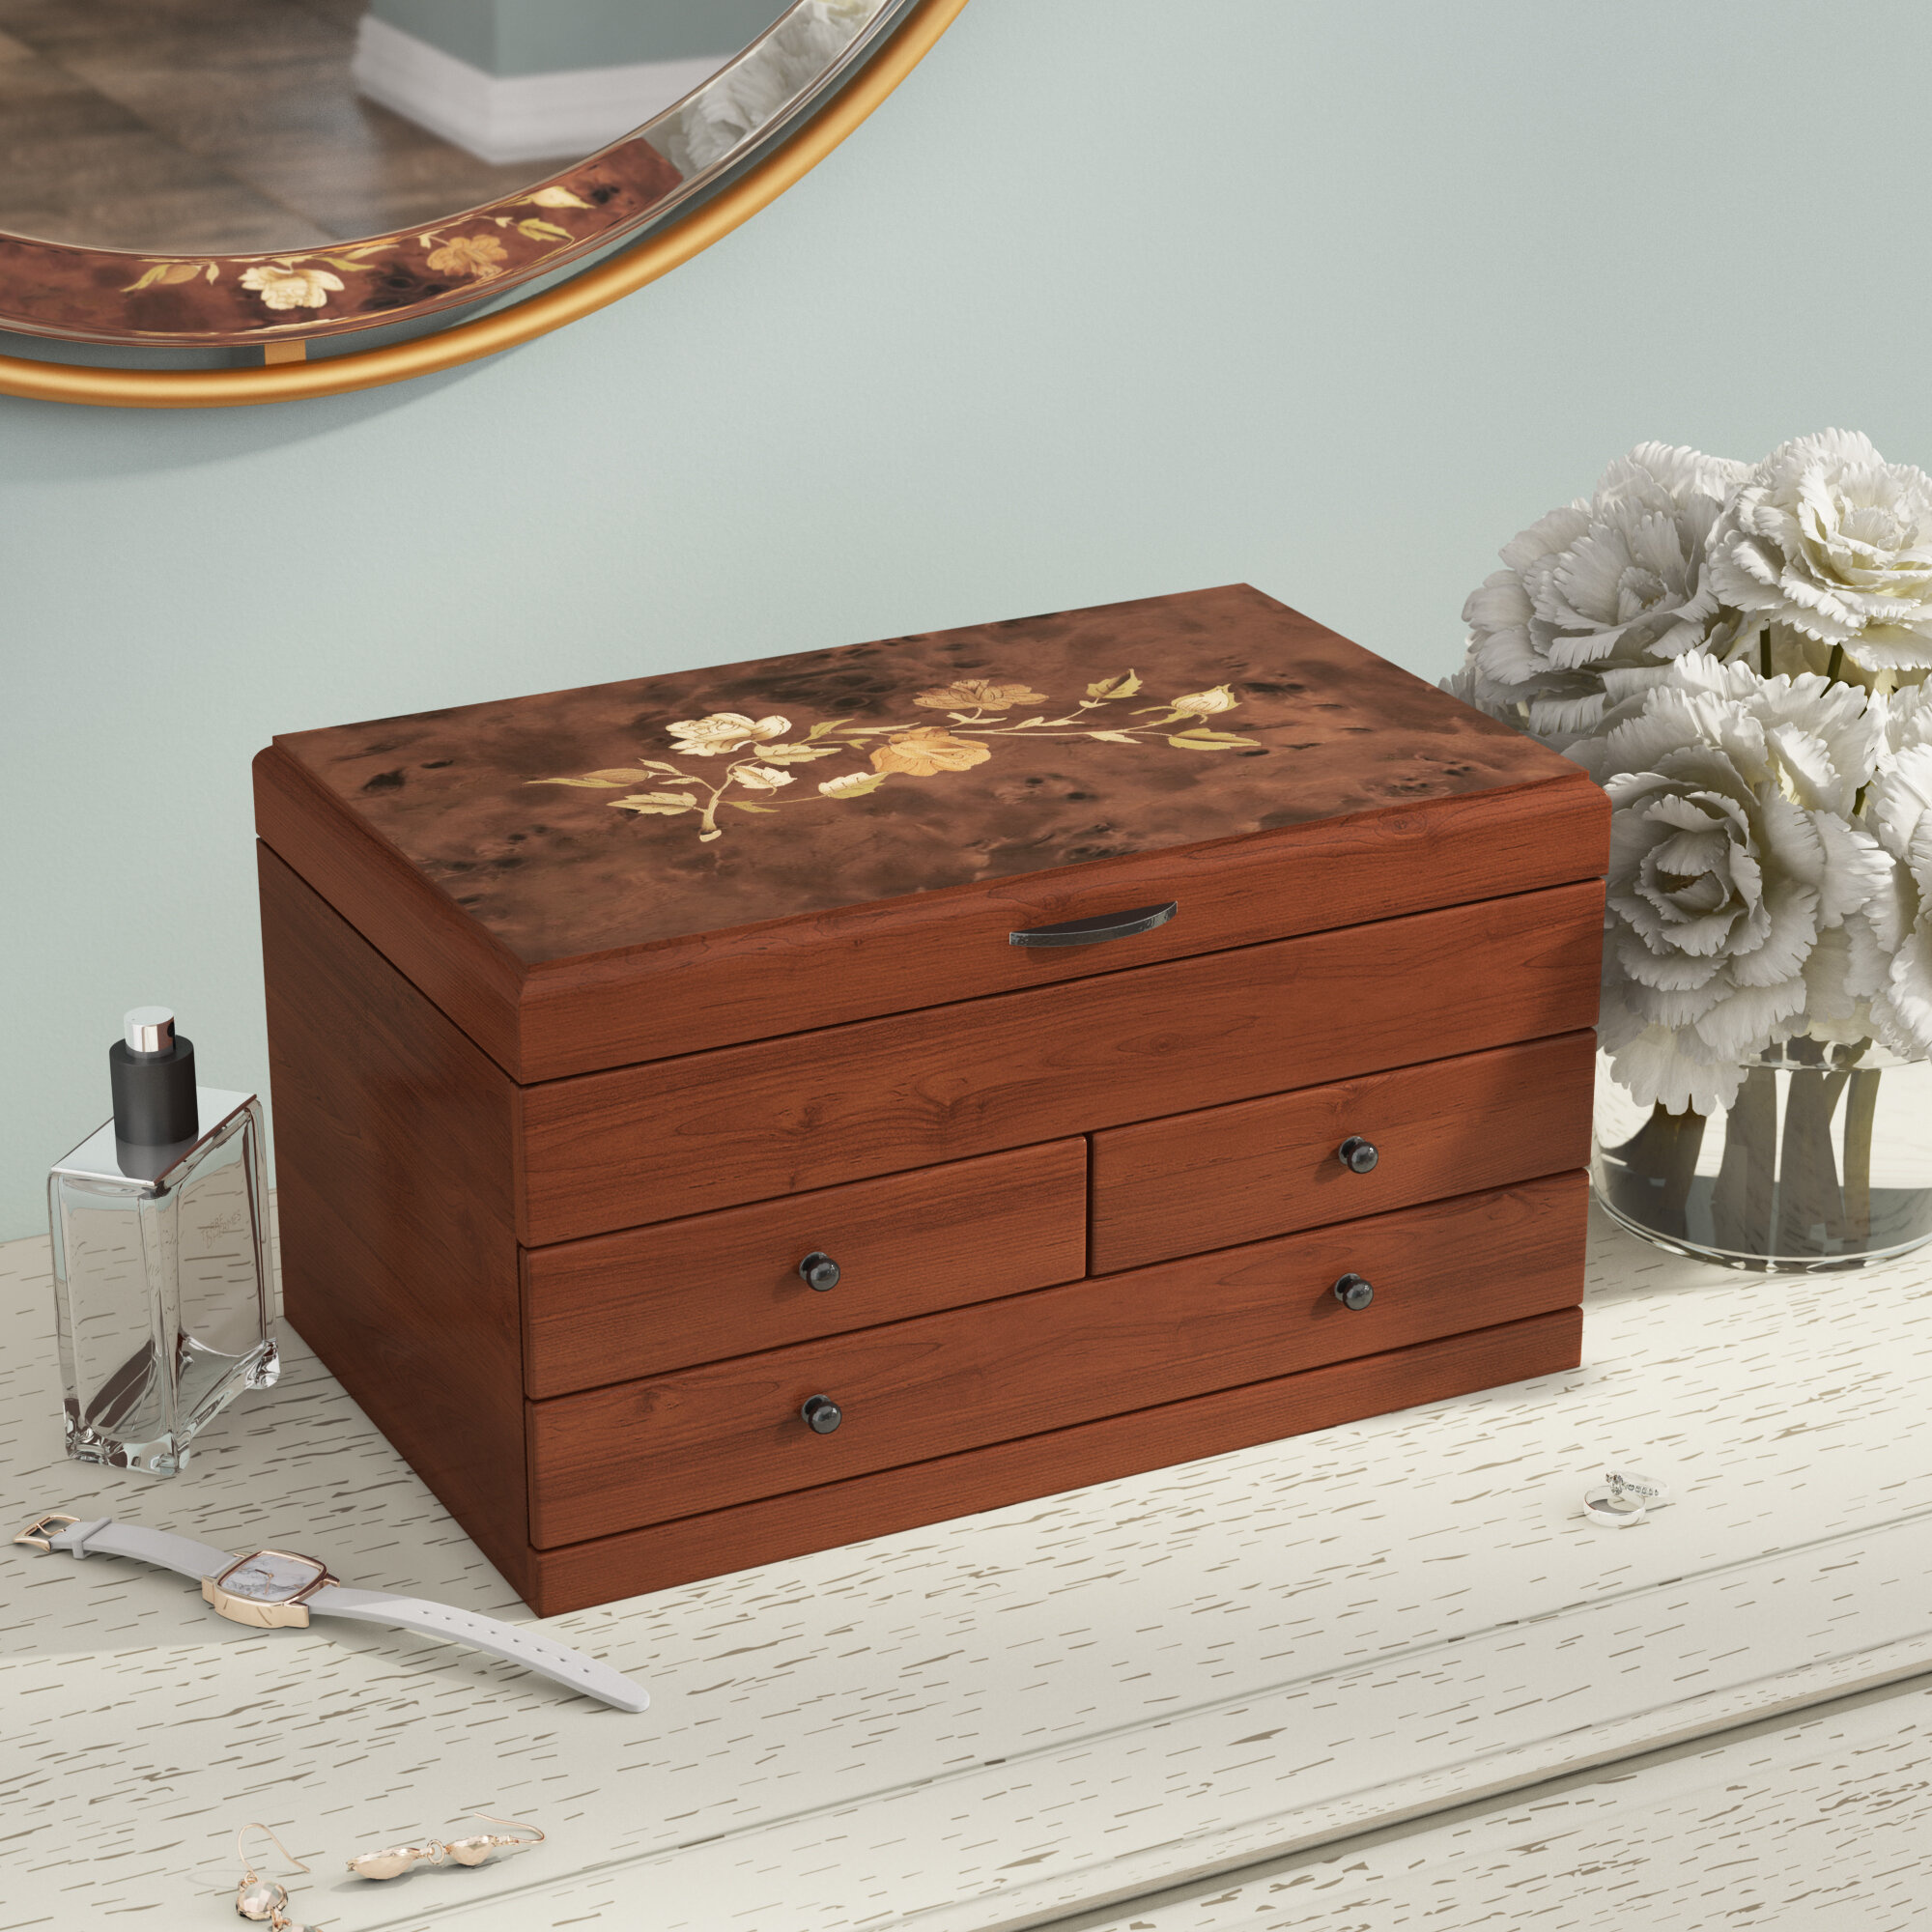 Wooden jewelry box by Charlton Home, a timeless piece, 2000x2000 HD Handy